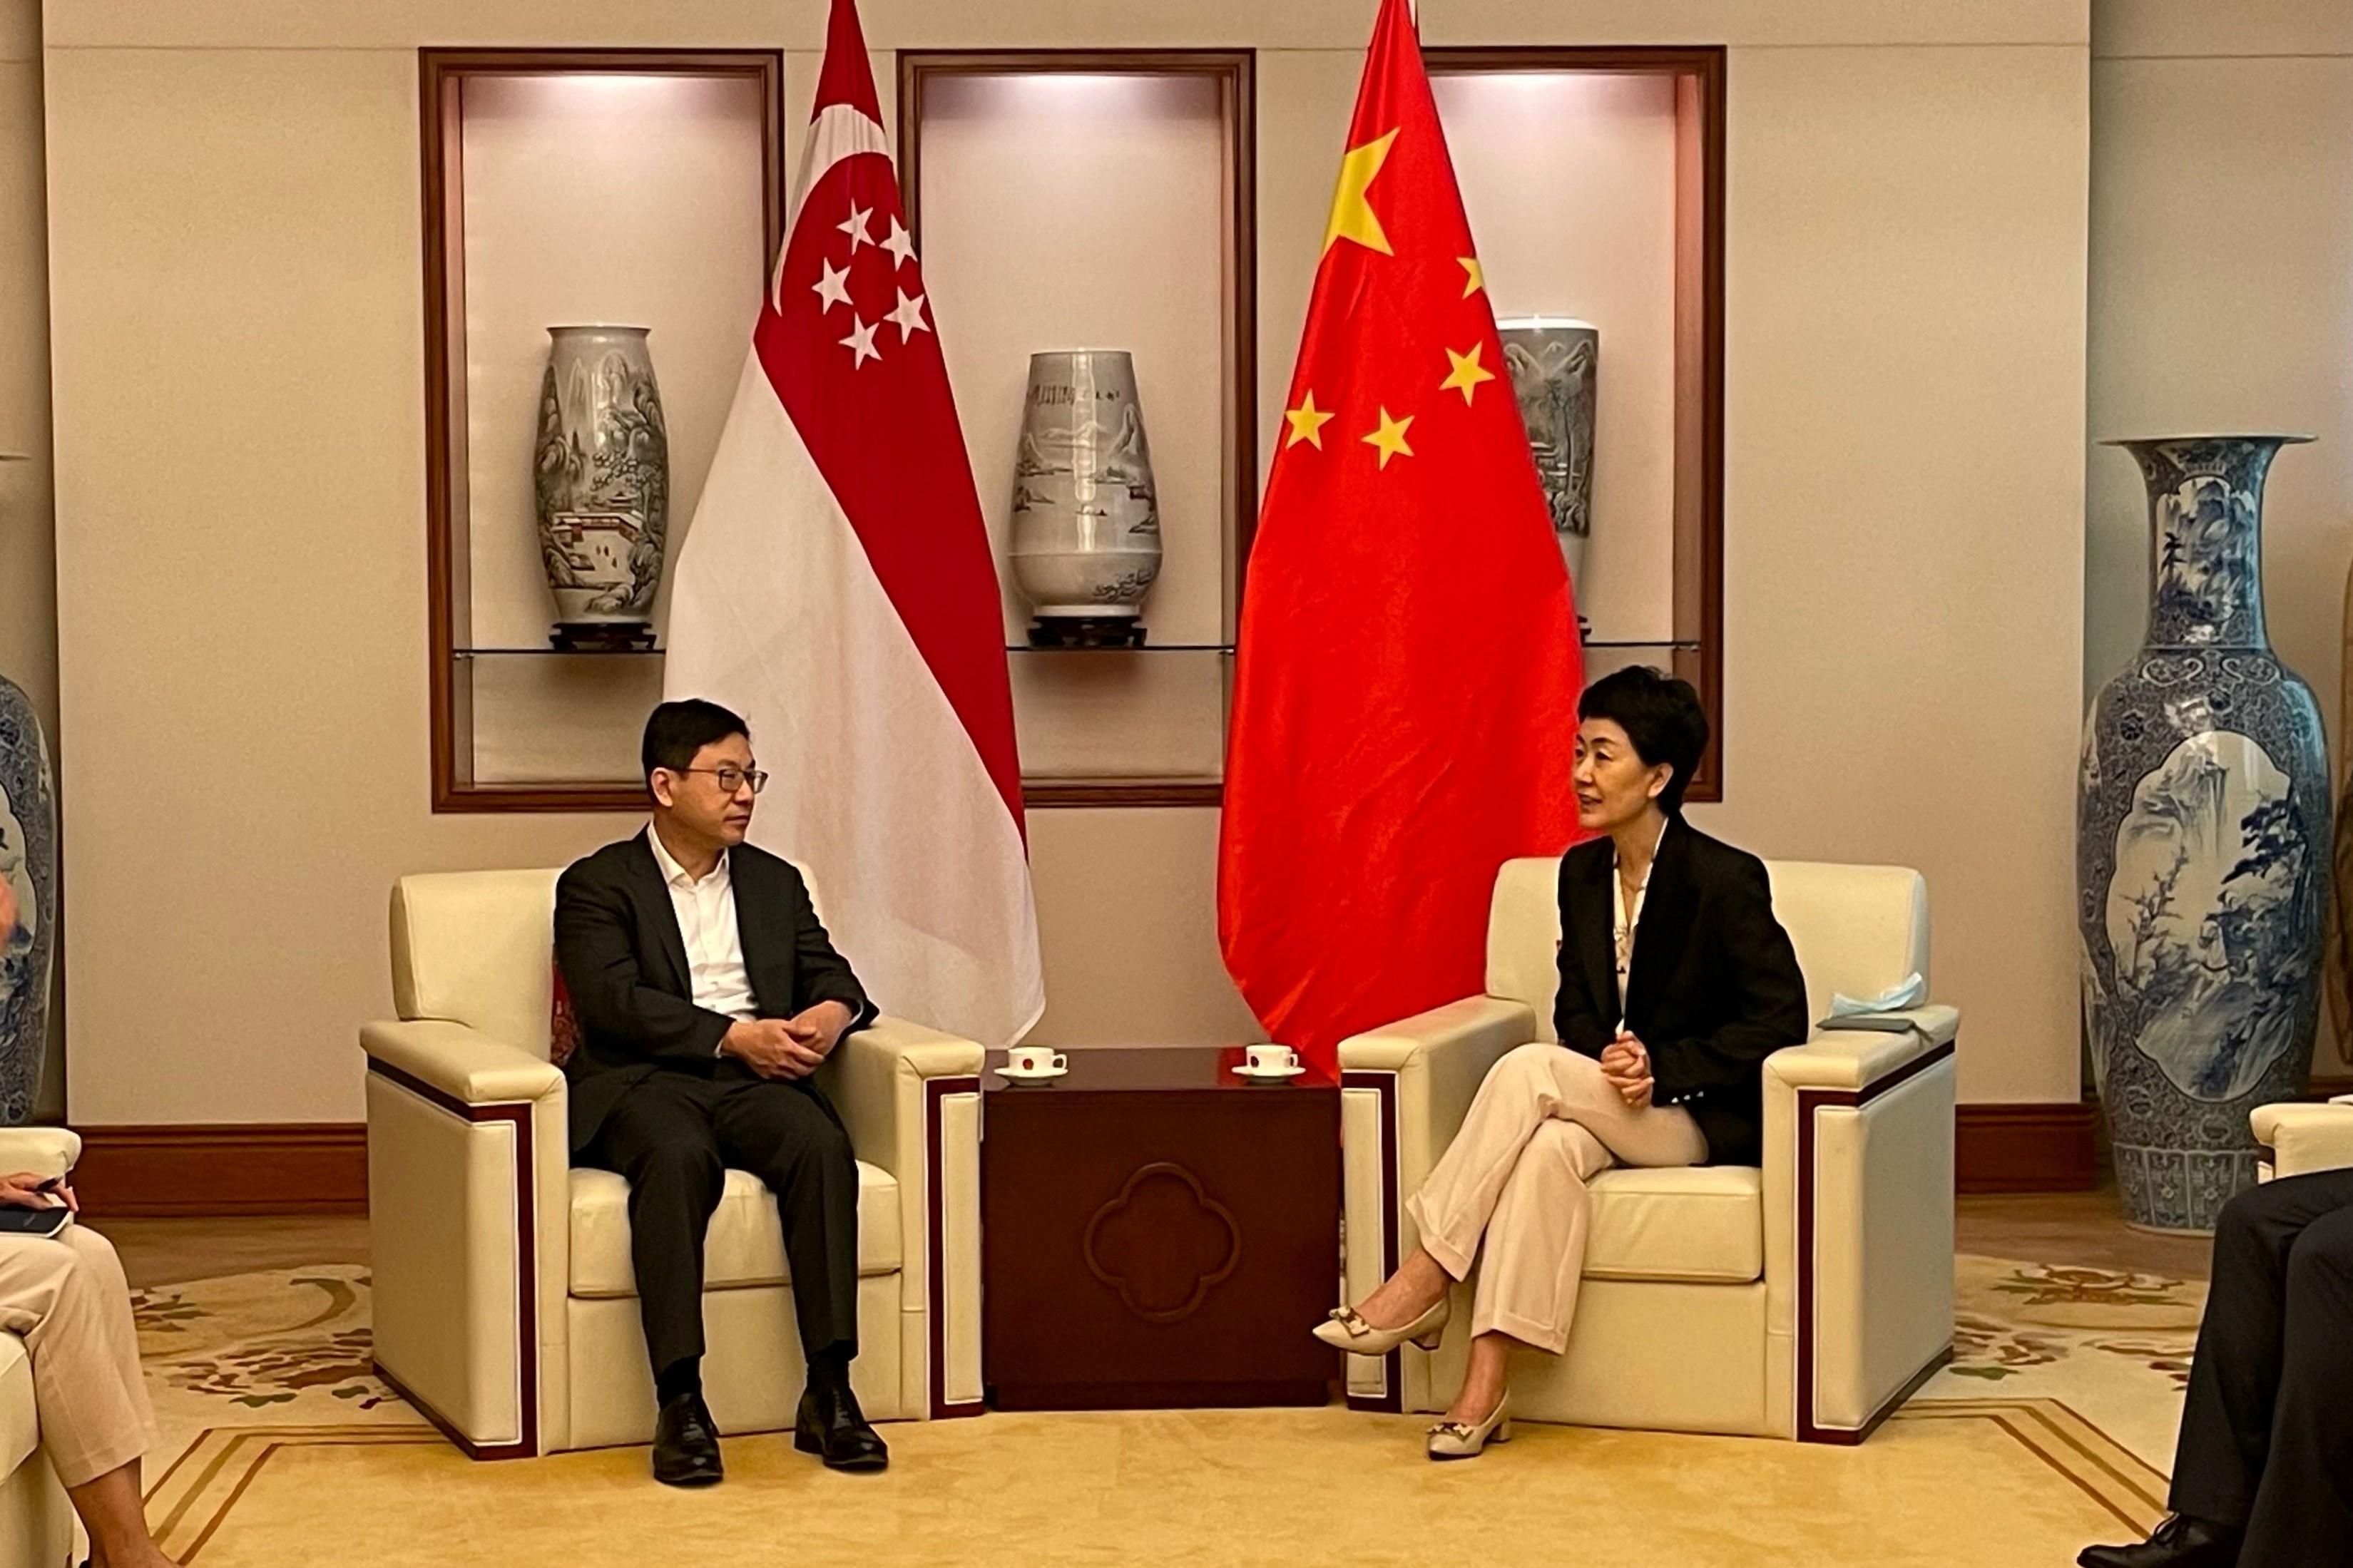 The Secretary for Labour and Welfare, Mr Chris Sun (left), met with the Chinese Ambassador to Singapore, Ms Sun Haiyan (right), yesterday morning (January 6) during his visit to Singapore. He updated her on the latest labour market and economic situation in Hong Kong.